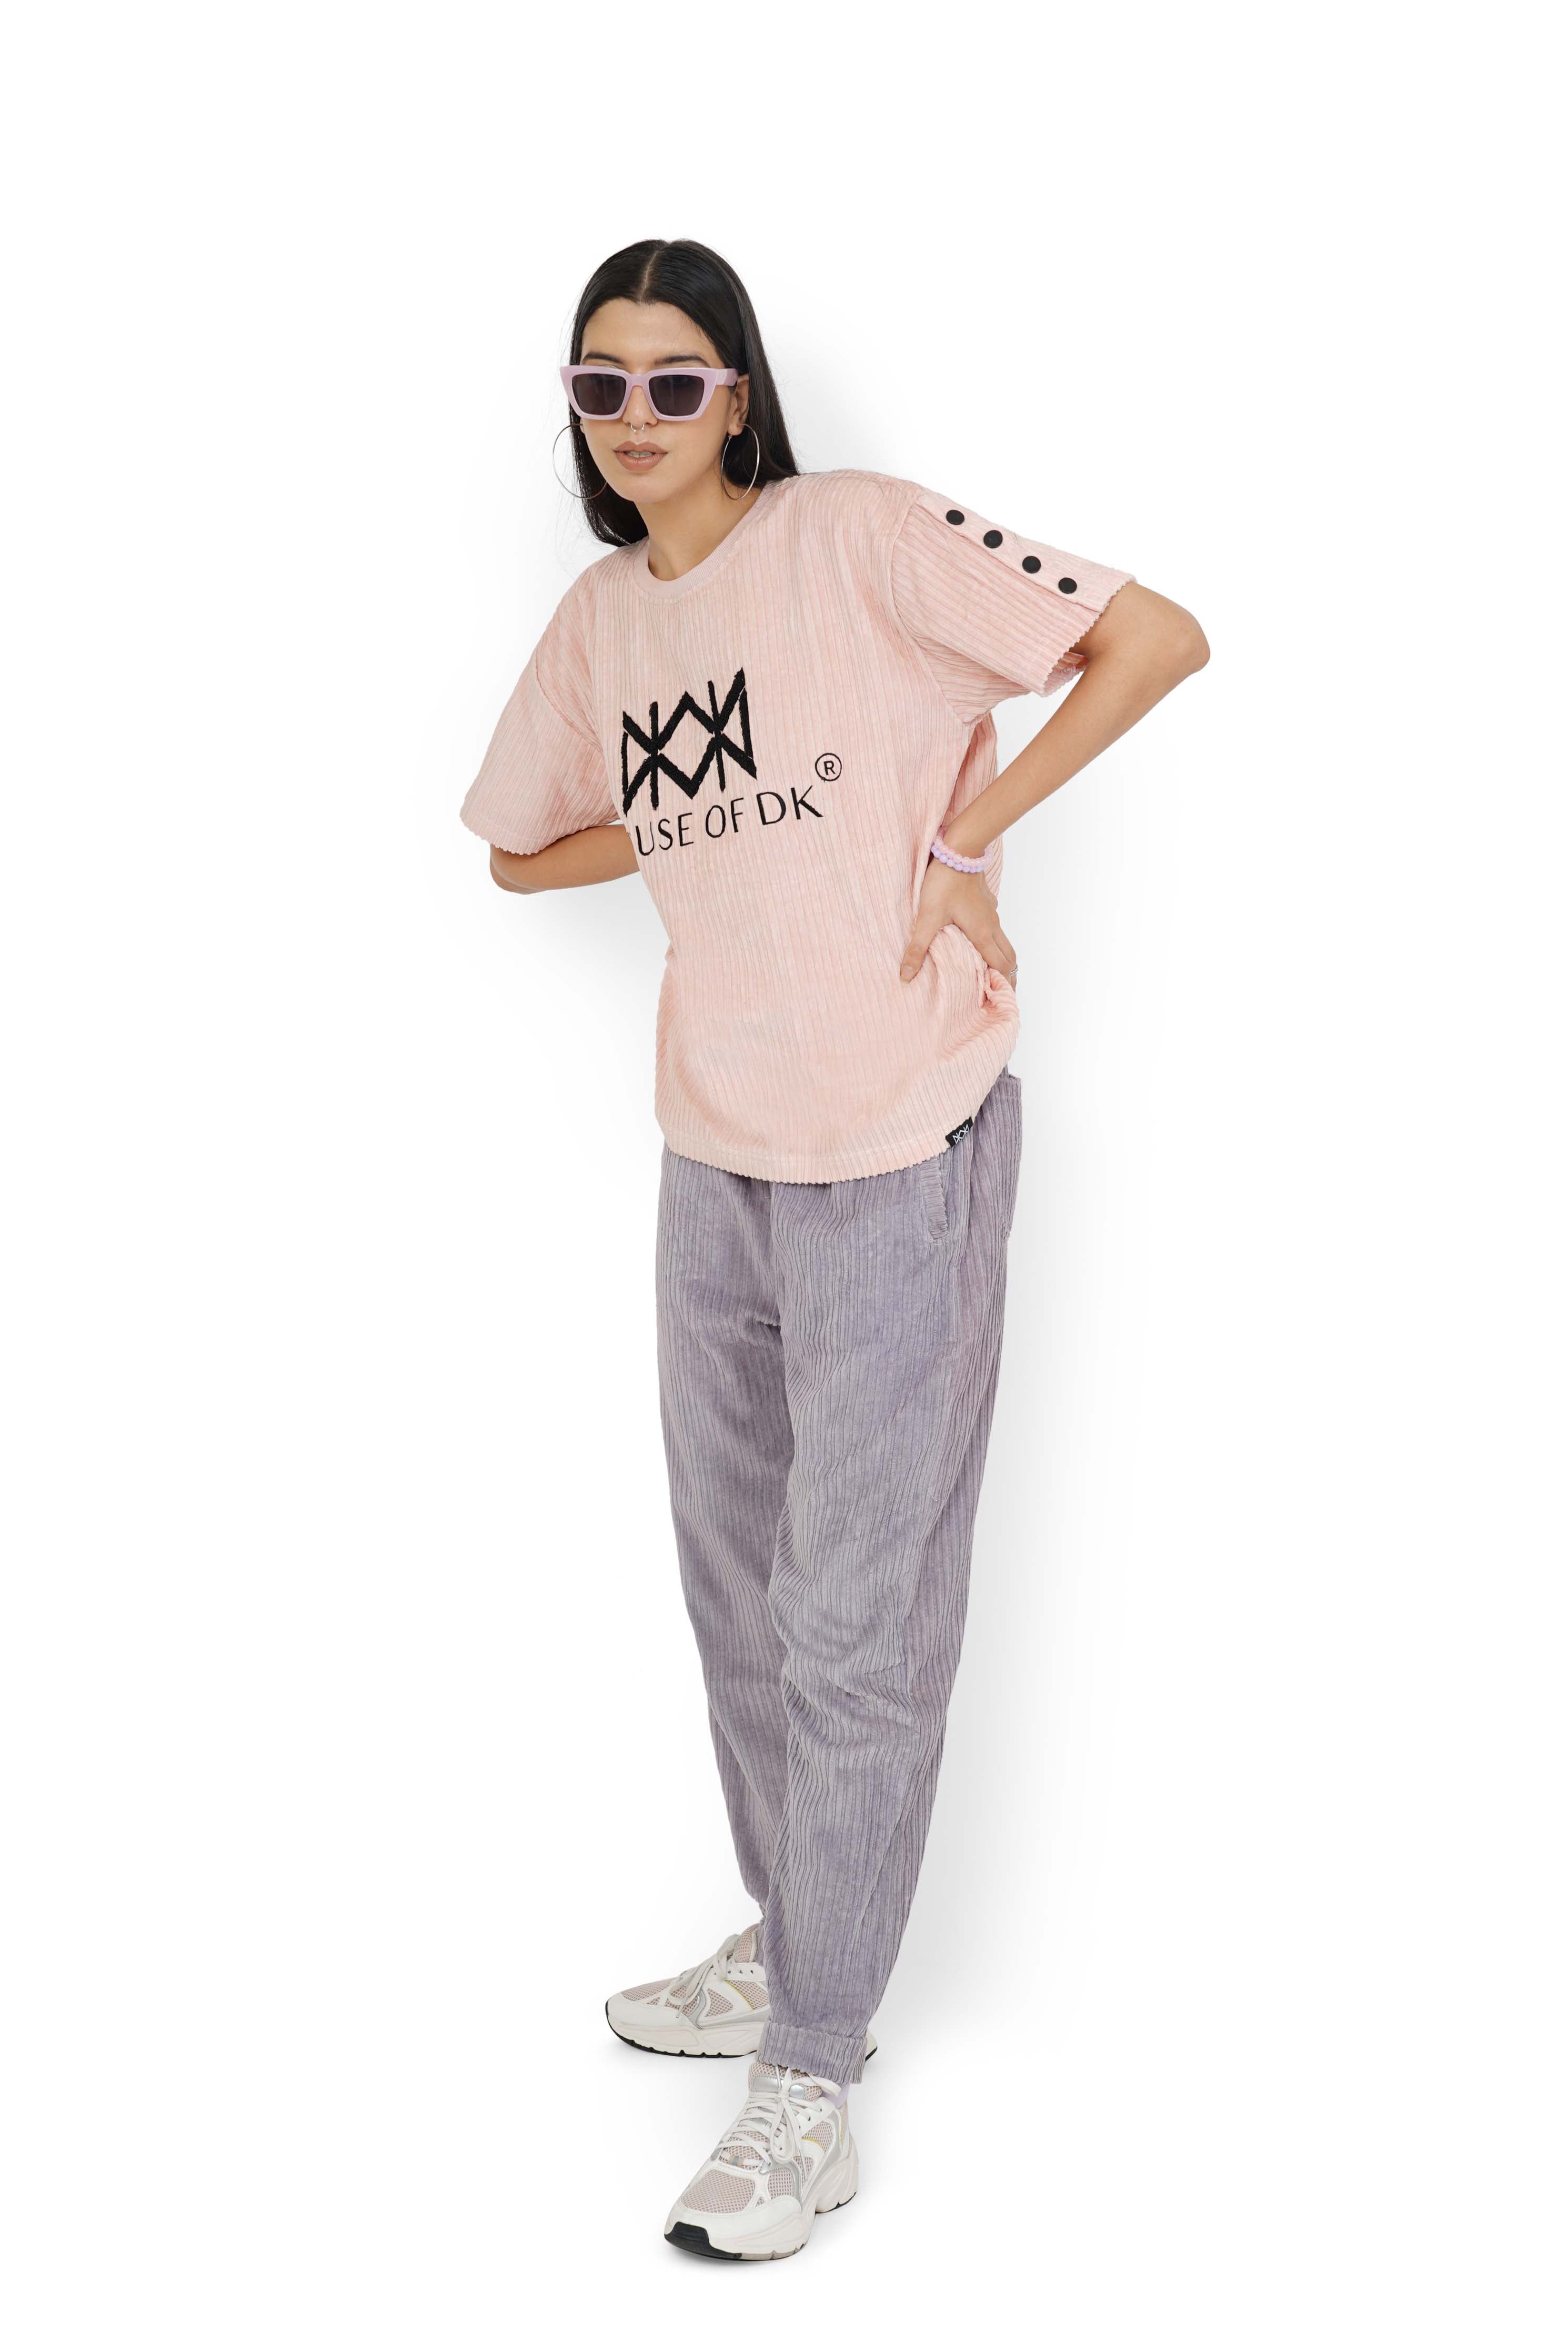 Track Pants Trousers Apparel Set  Buy Track Pants Trousers Apparel Set  online in India